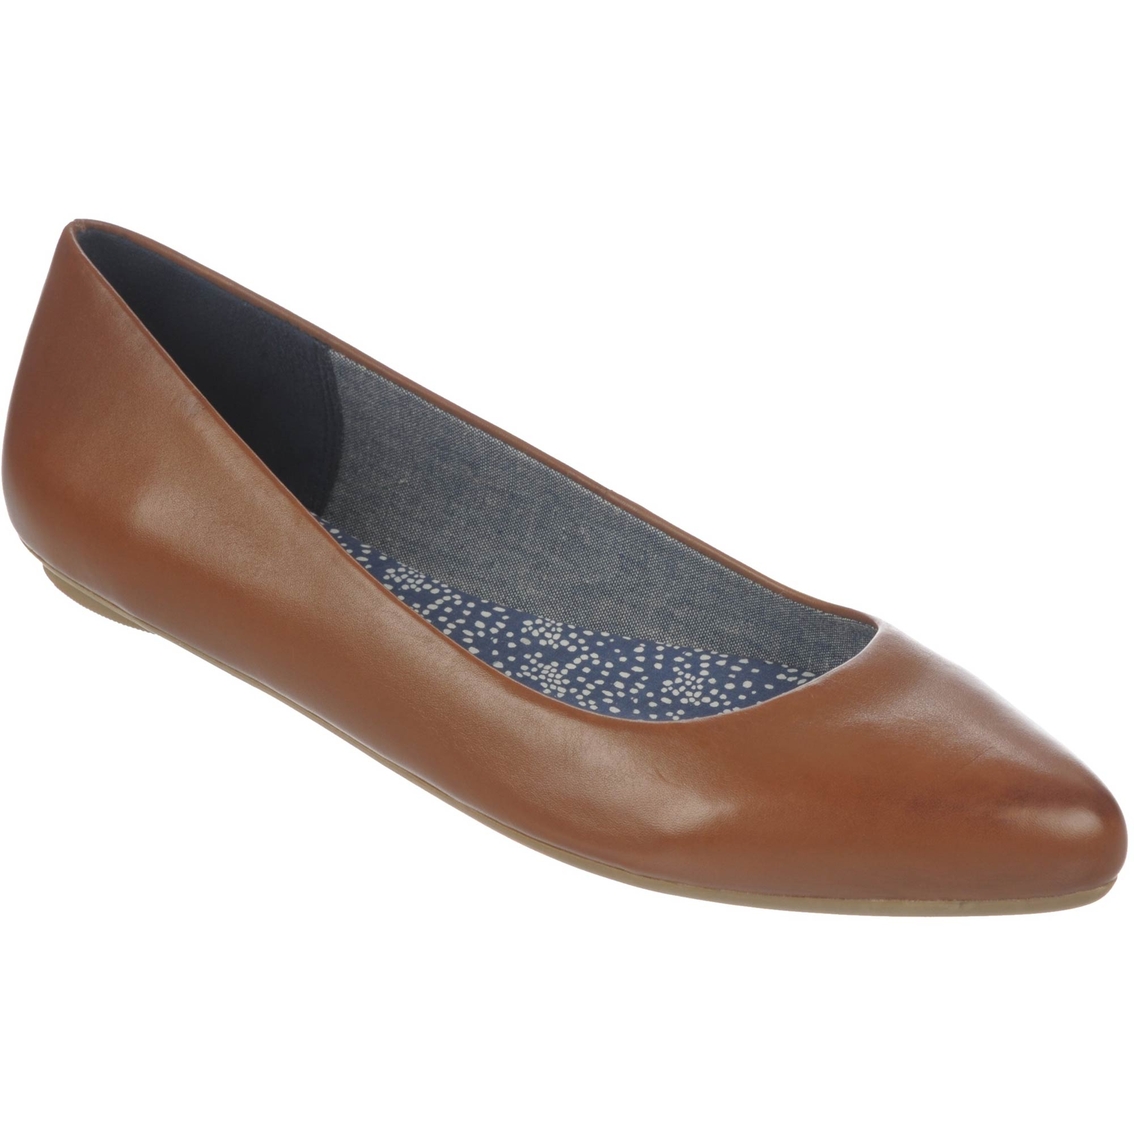 Dr. Scholl's Really Pointed Toe Flats | Flats | Shoes | Shop The Exchange